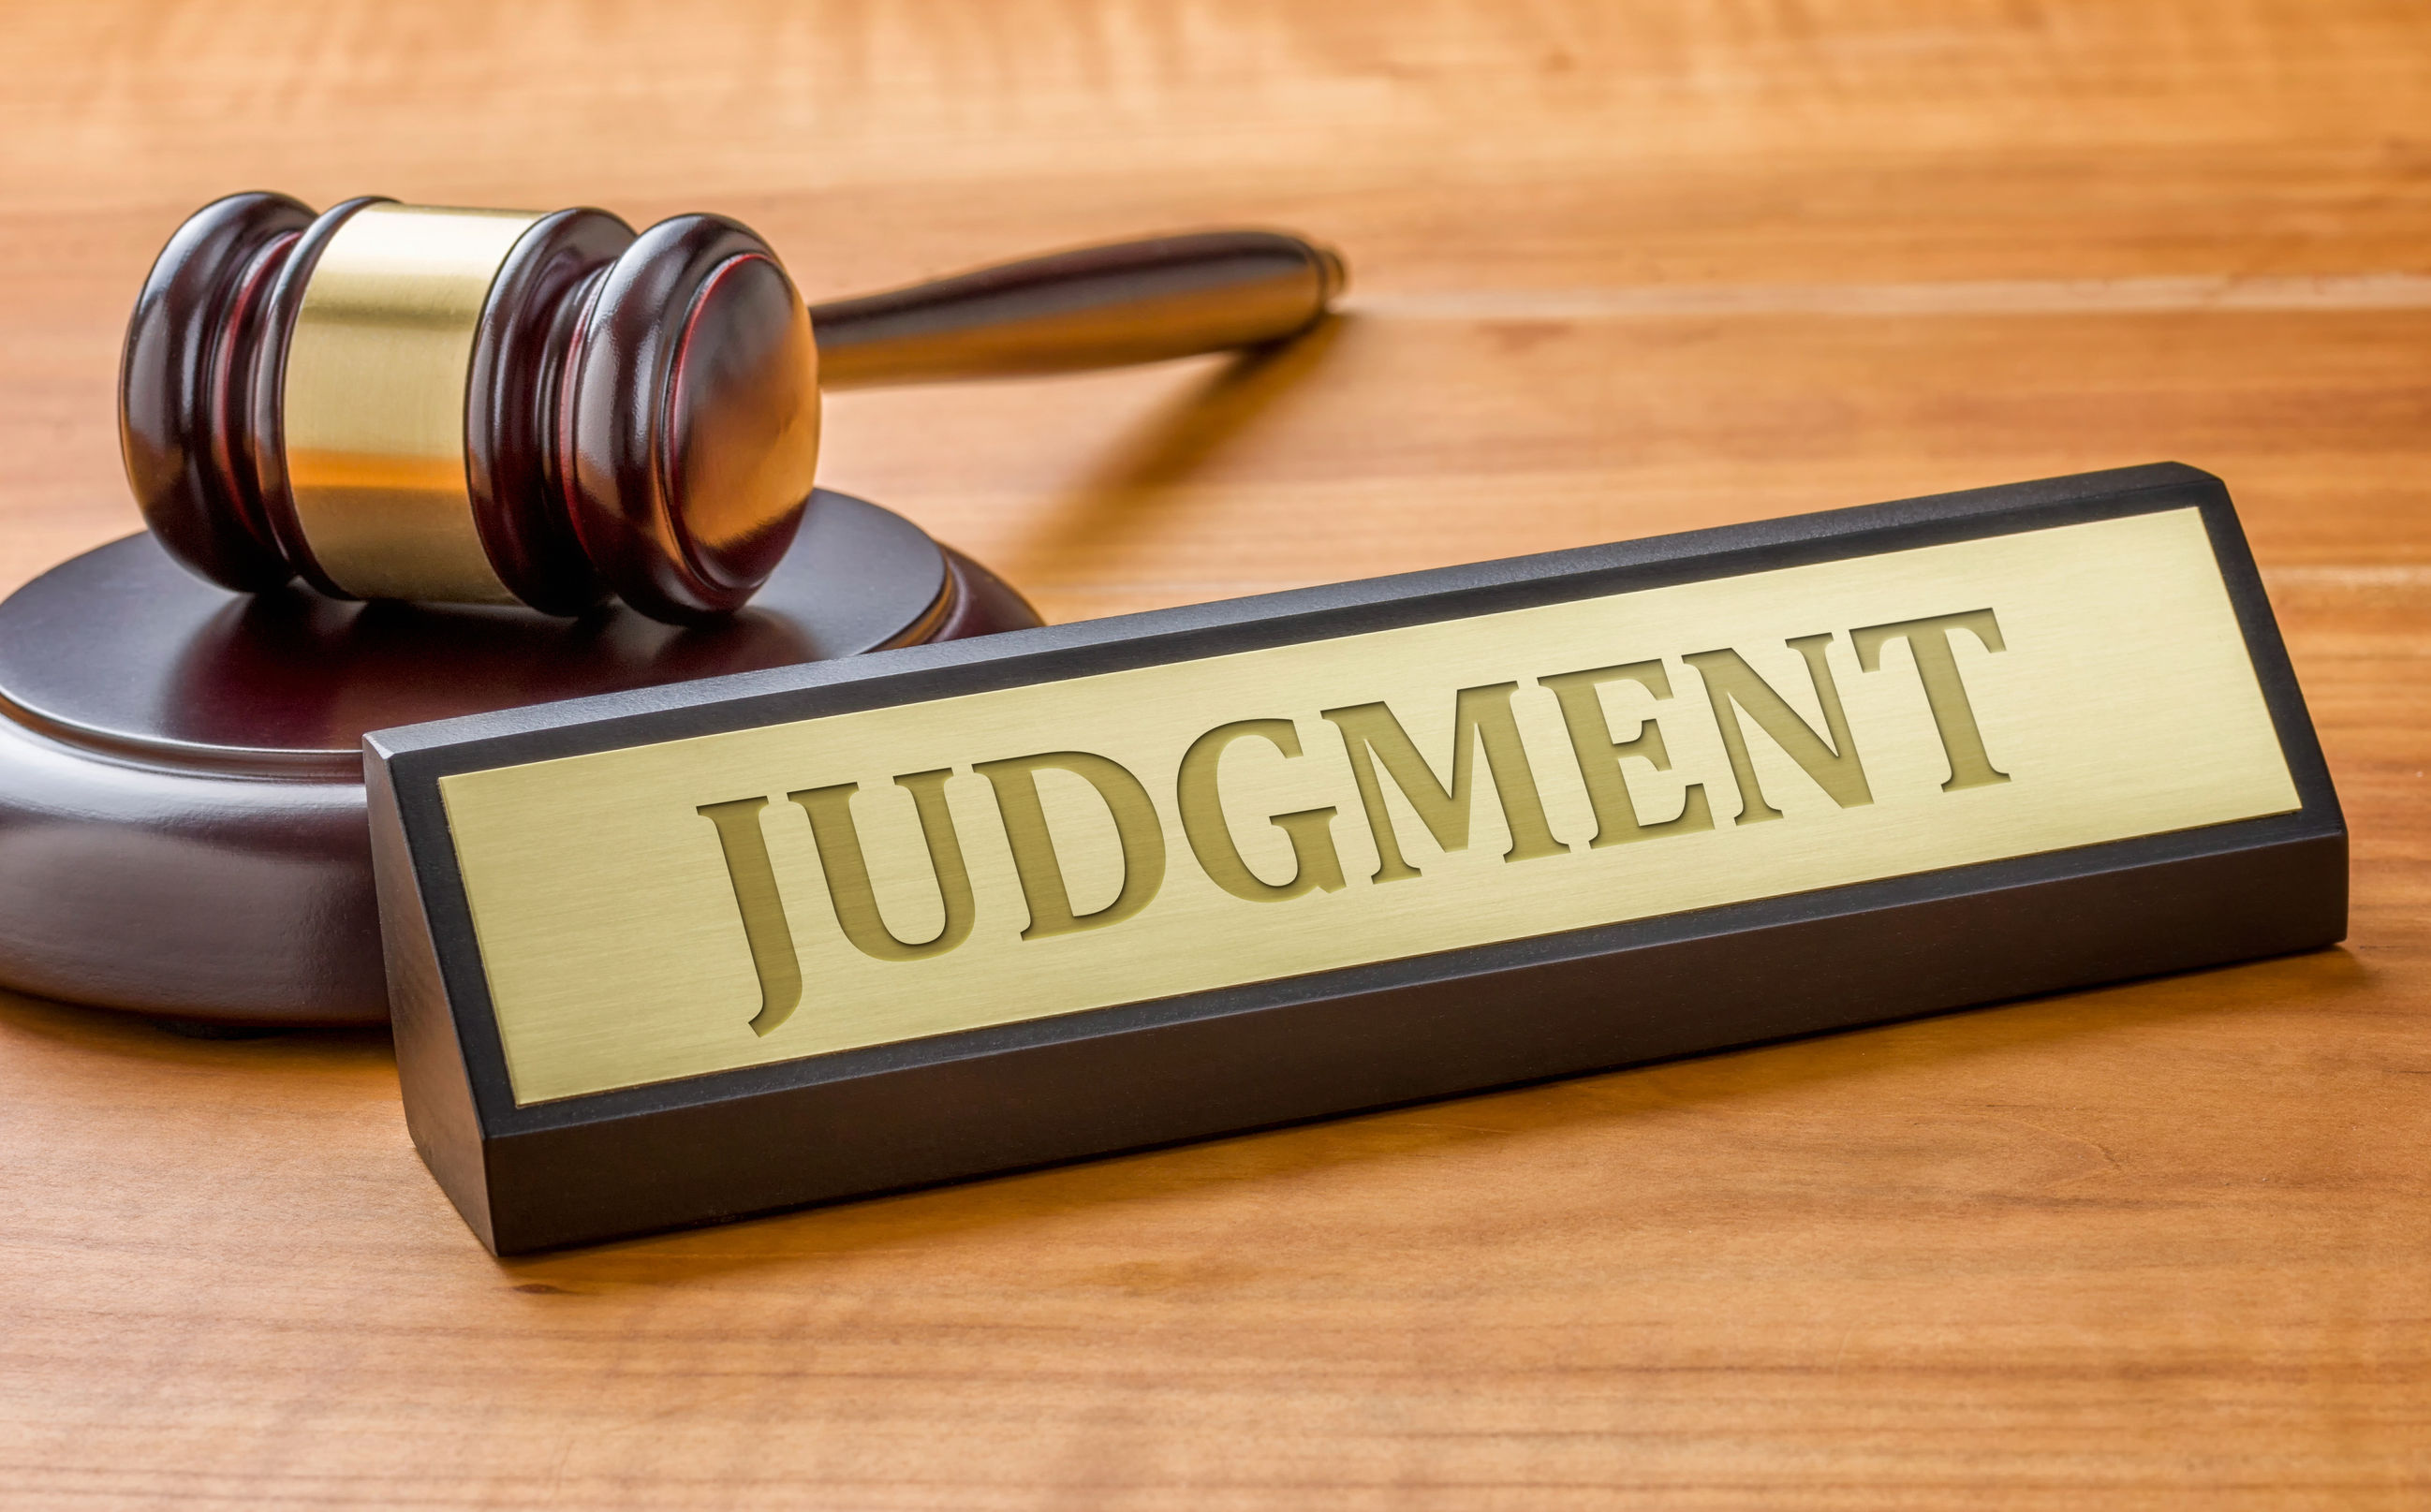 Registering a foreign judgment in Missouri